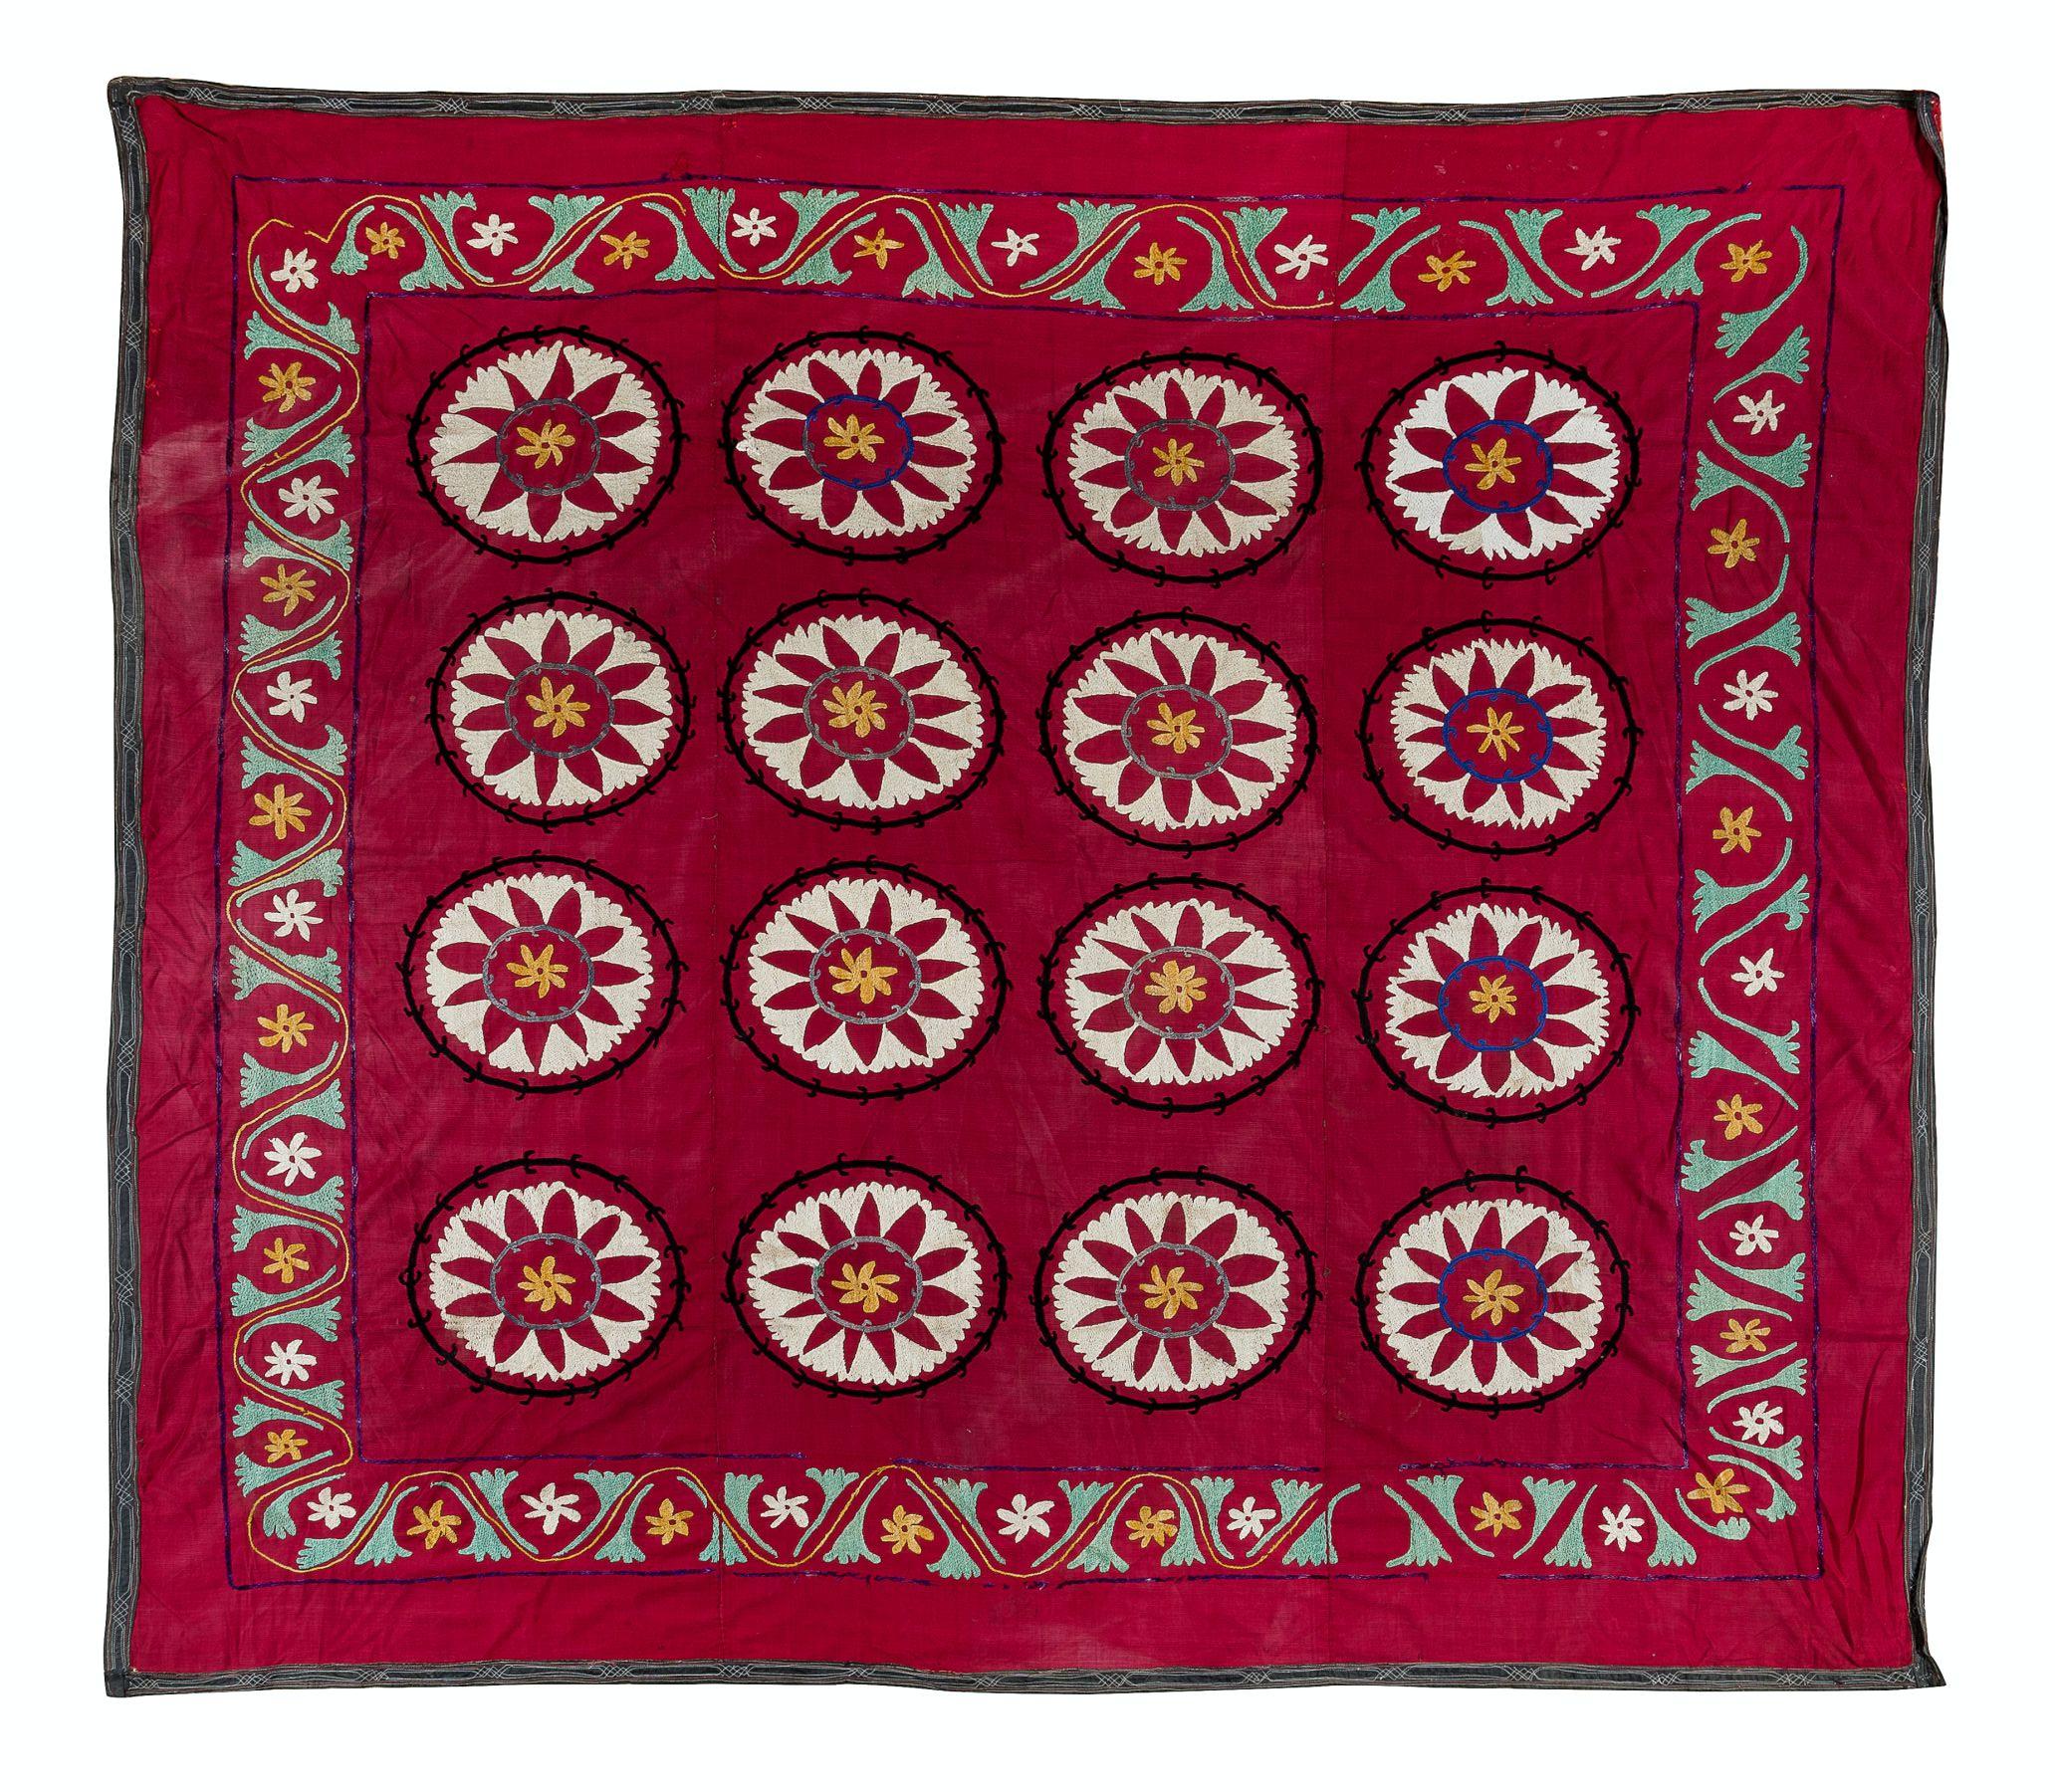 6.9x6.9 Ft Vintage Silk Hand Embroidery Red Bed Cover, Asian Suzani Wall Hanging In Good Condition For Sale In Philadelphia, PA